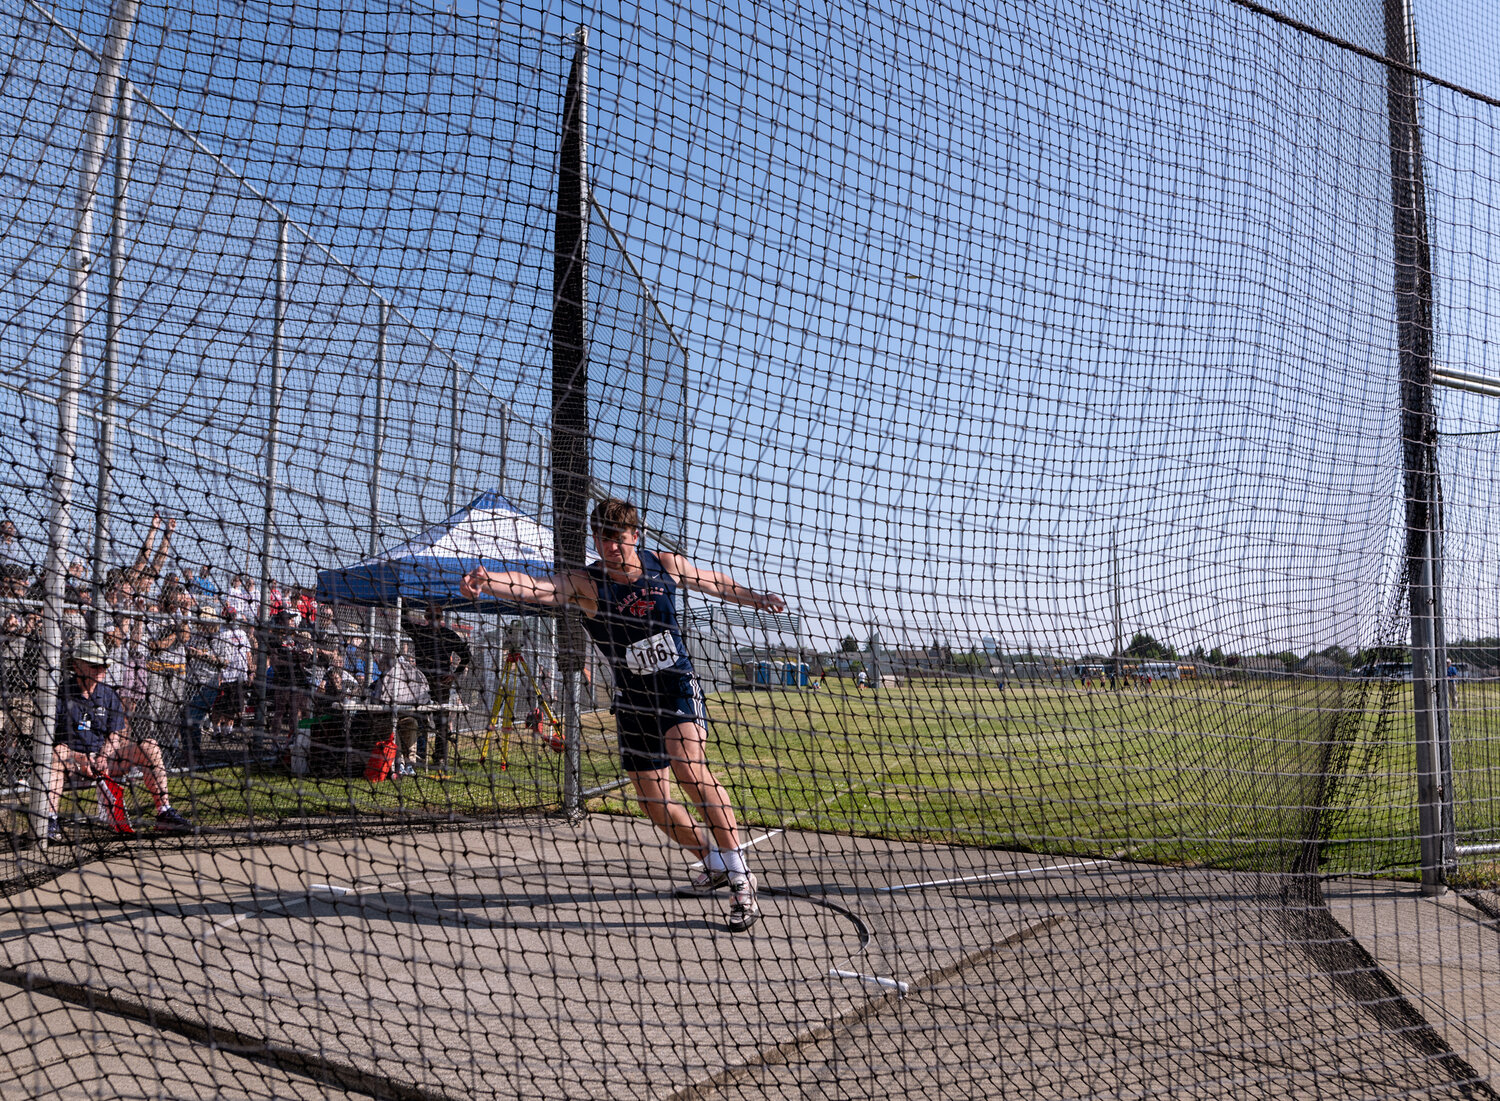 Black Hills’ Liam Wall completes his spin as the disc flies off into the distance during the finals of the 2A boys discus at the WIAA 2A/3A/4A State Track and Field Championships on Thursday, May 25, 2023, at Mount Tahoma High School in Tacoma. (Joshua Hart/For The Chronicle)